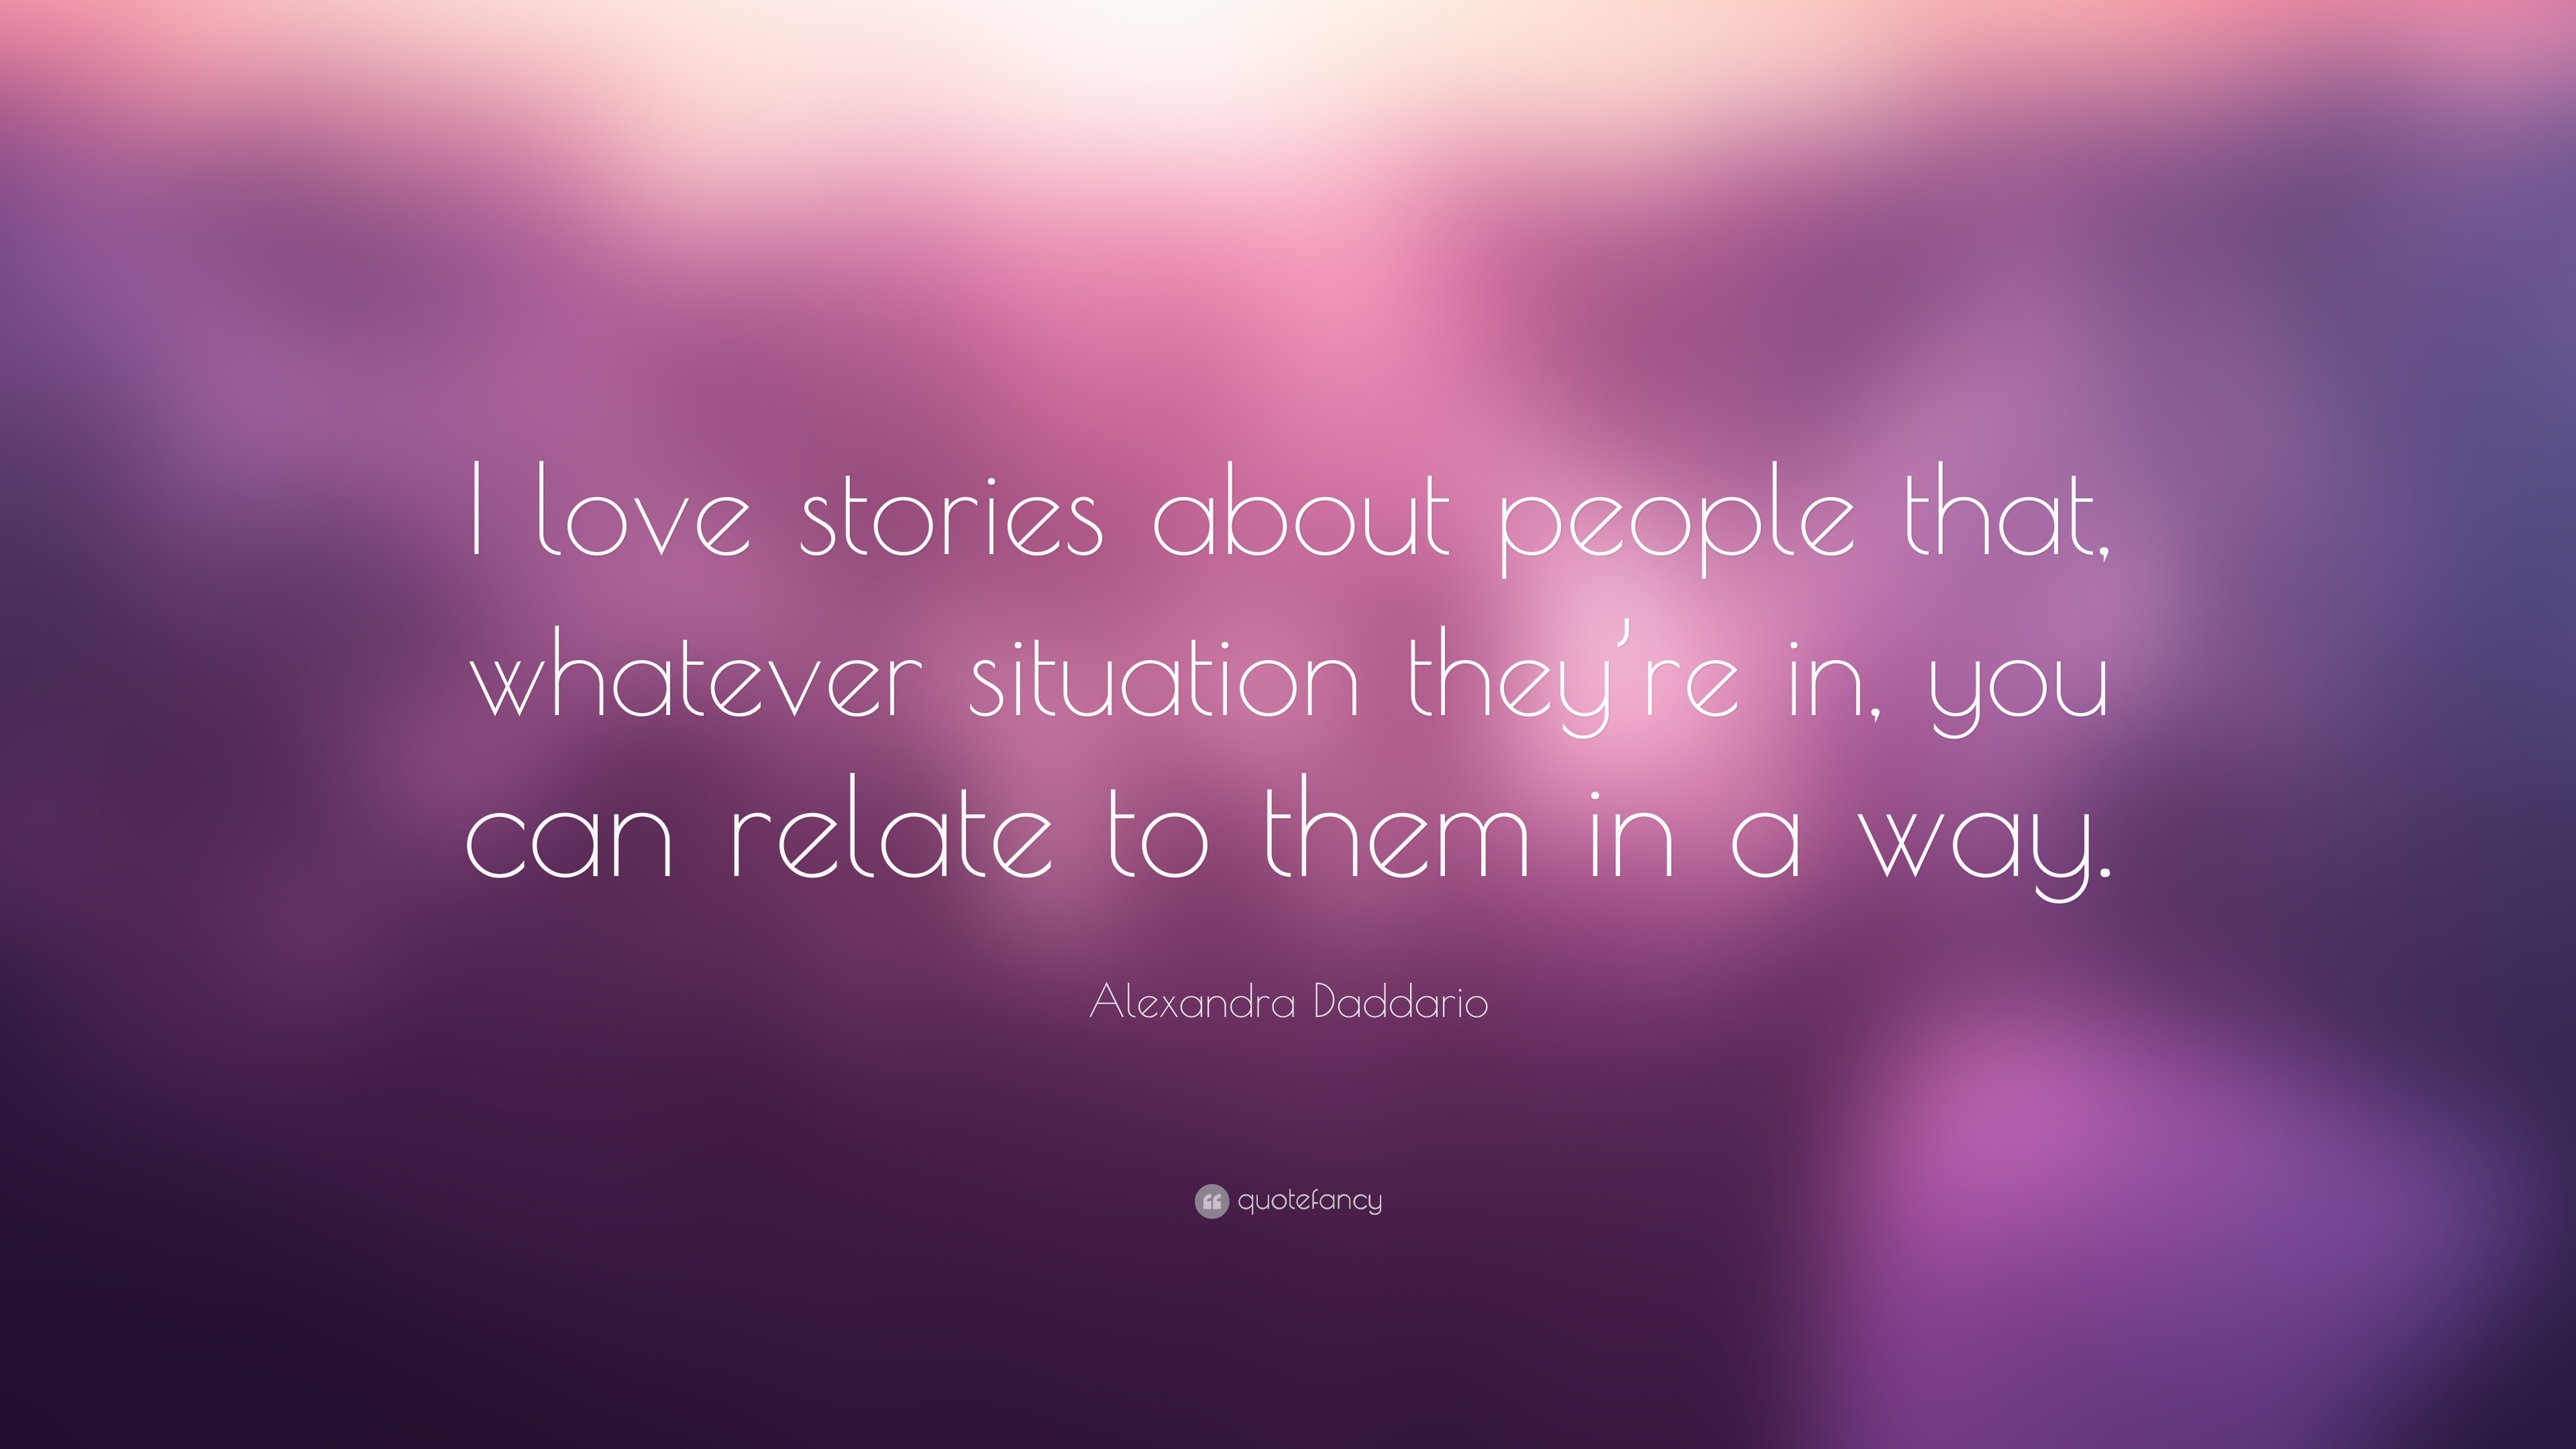 Alexandra Daddario Quote: “I love stories about people that, whatever ...